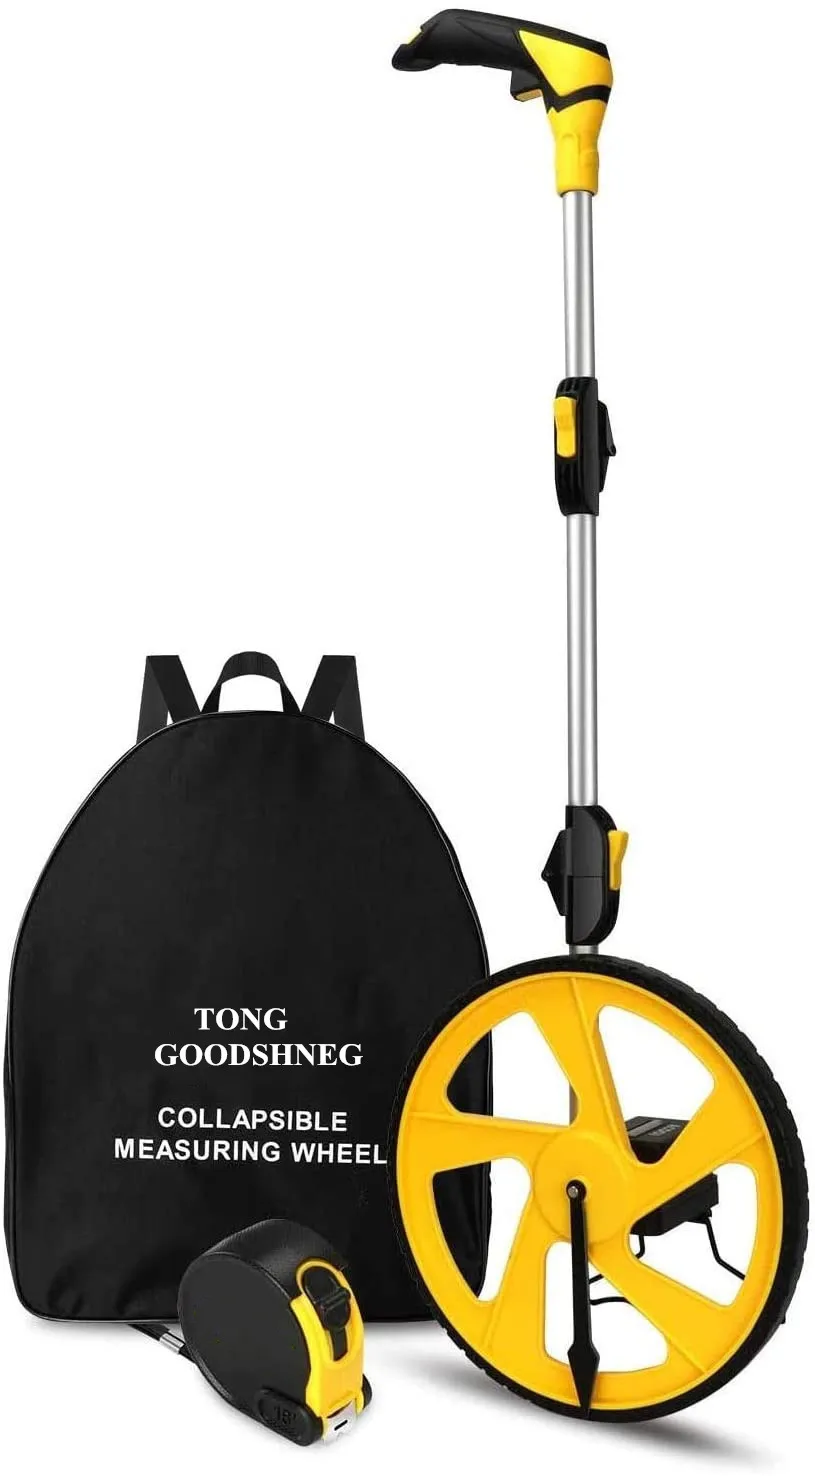 Mechanical Distance Measuring Wheel,Handheld Collapsible Measure  Industrial Measuring Wheel with Backpack Tape Measuring Tools